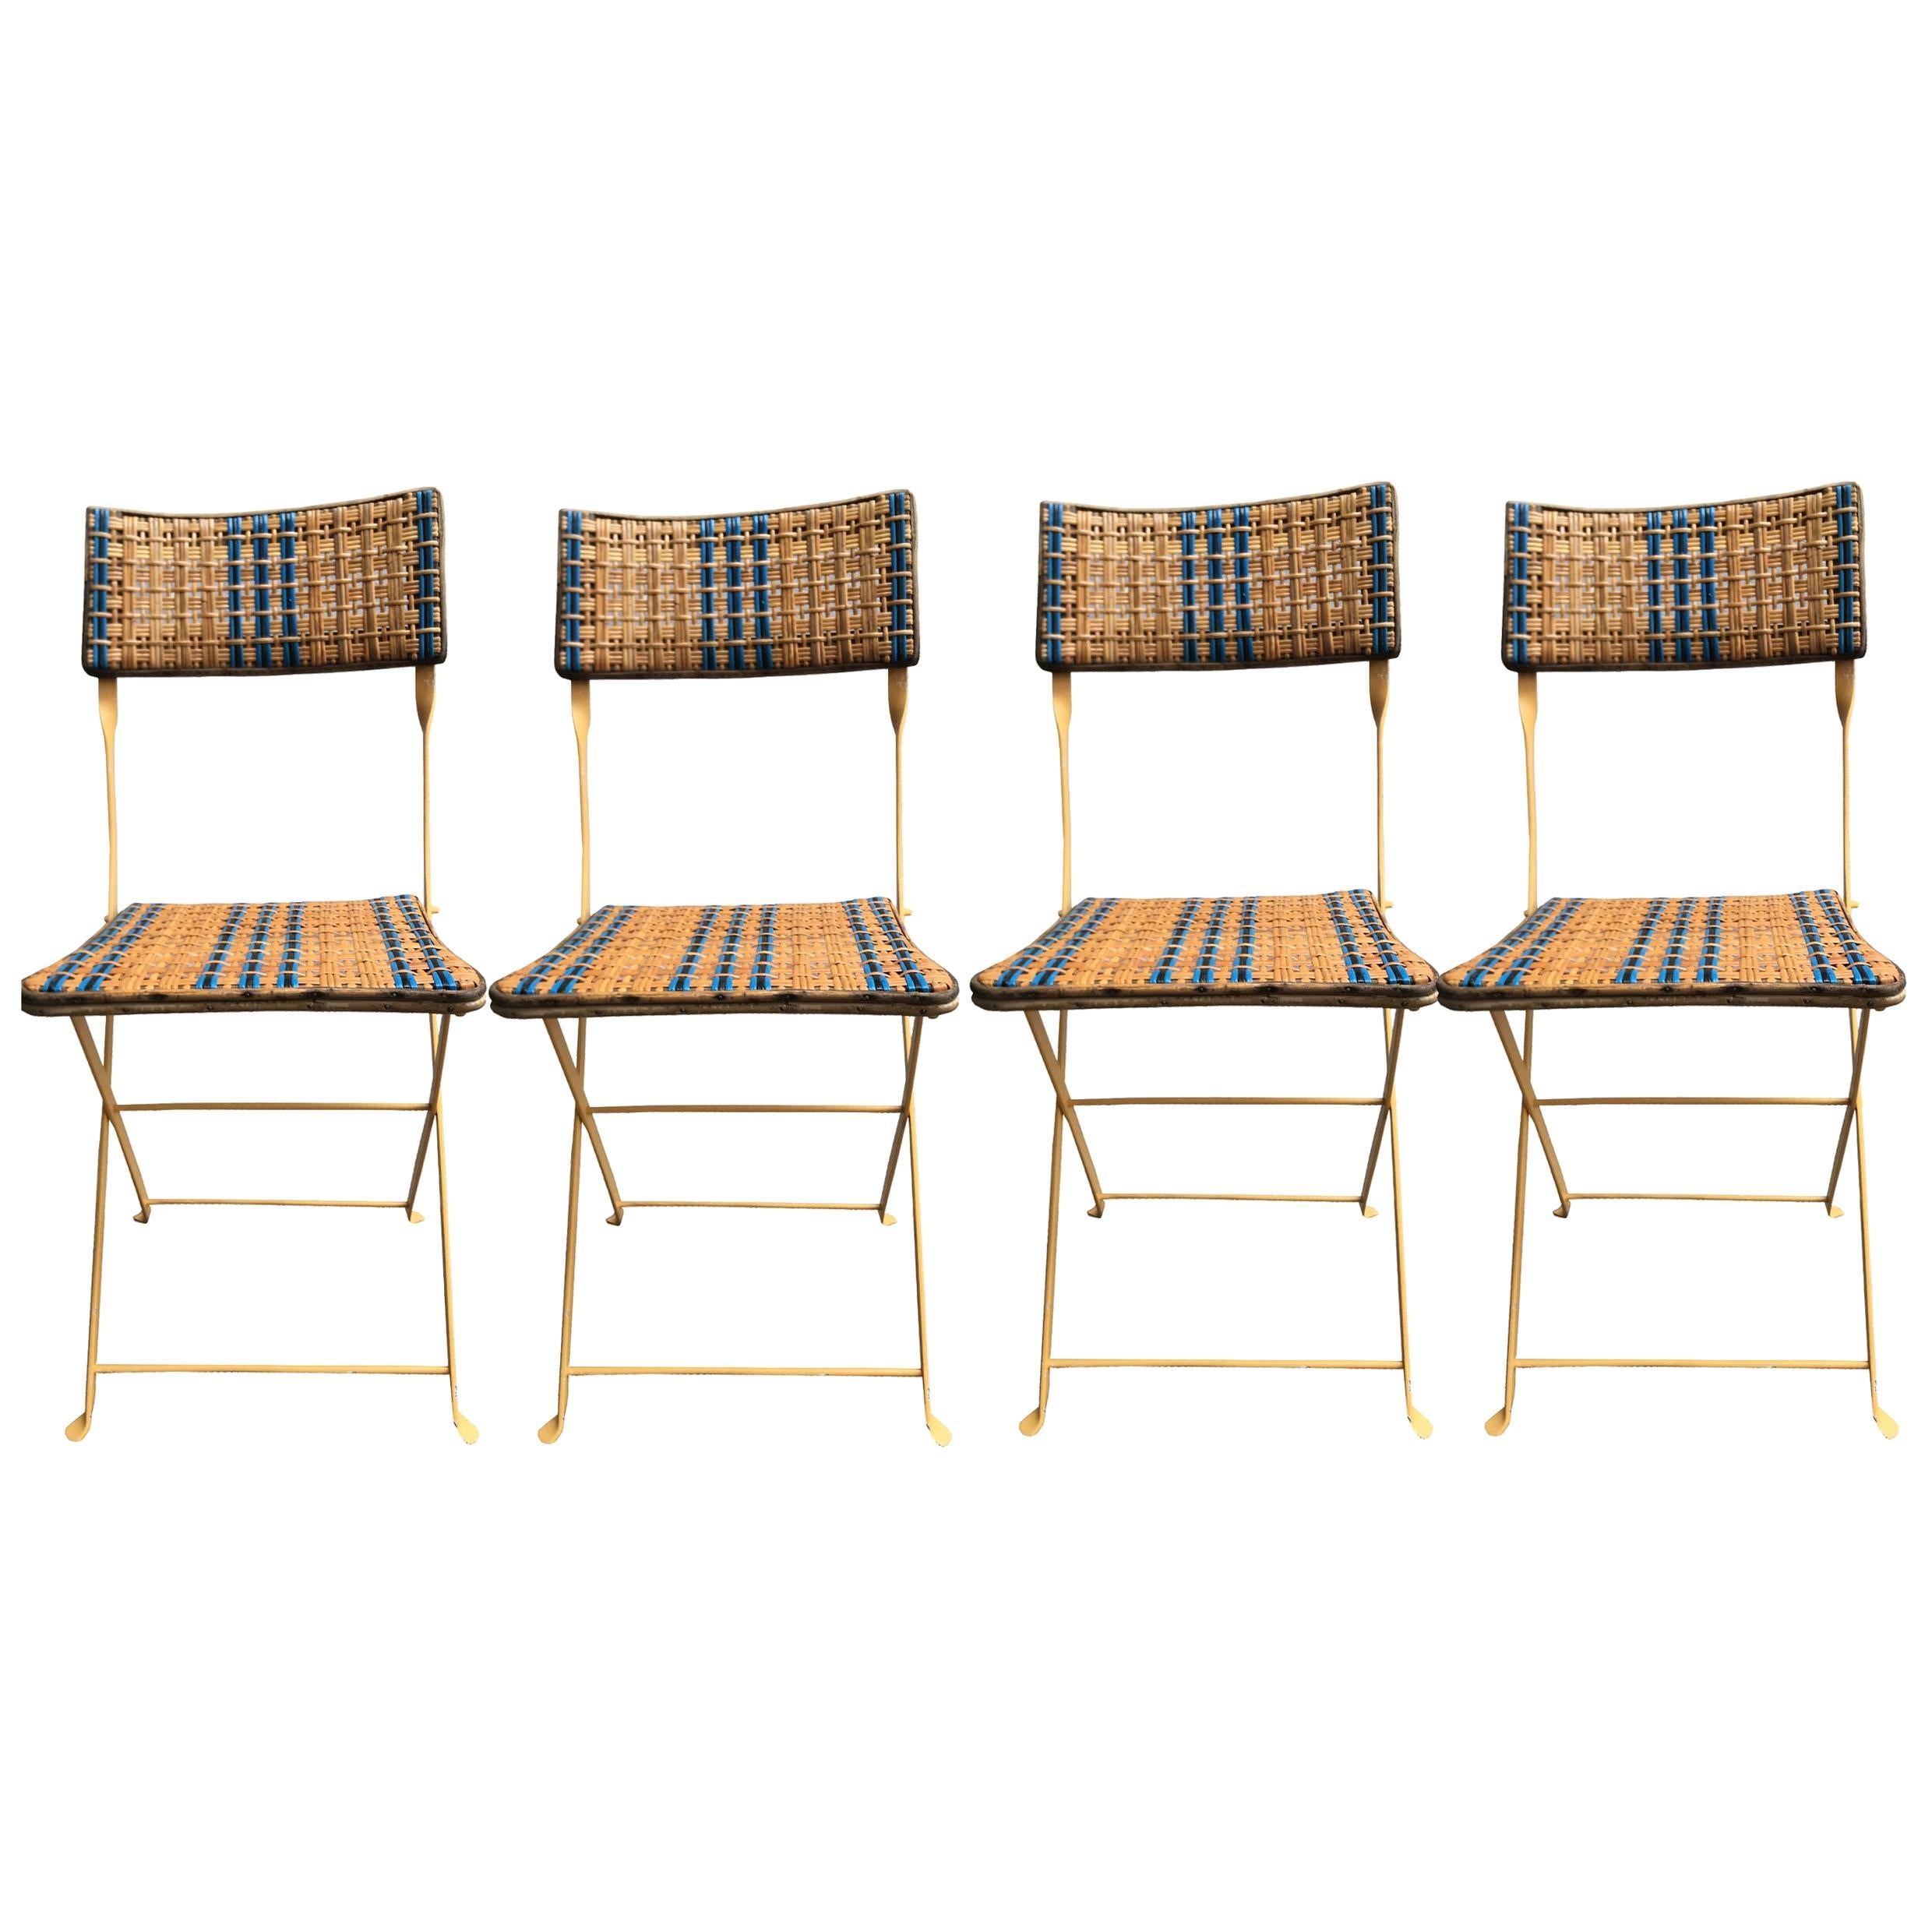 Four Foldable Garden Chairs in Rattan and Lacquered Iron